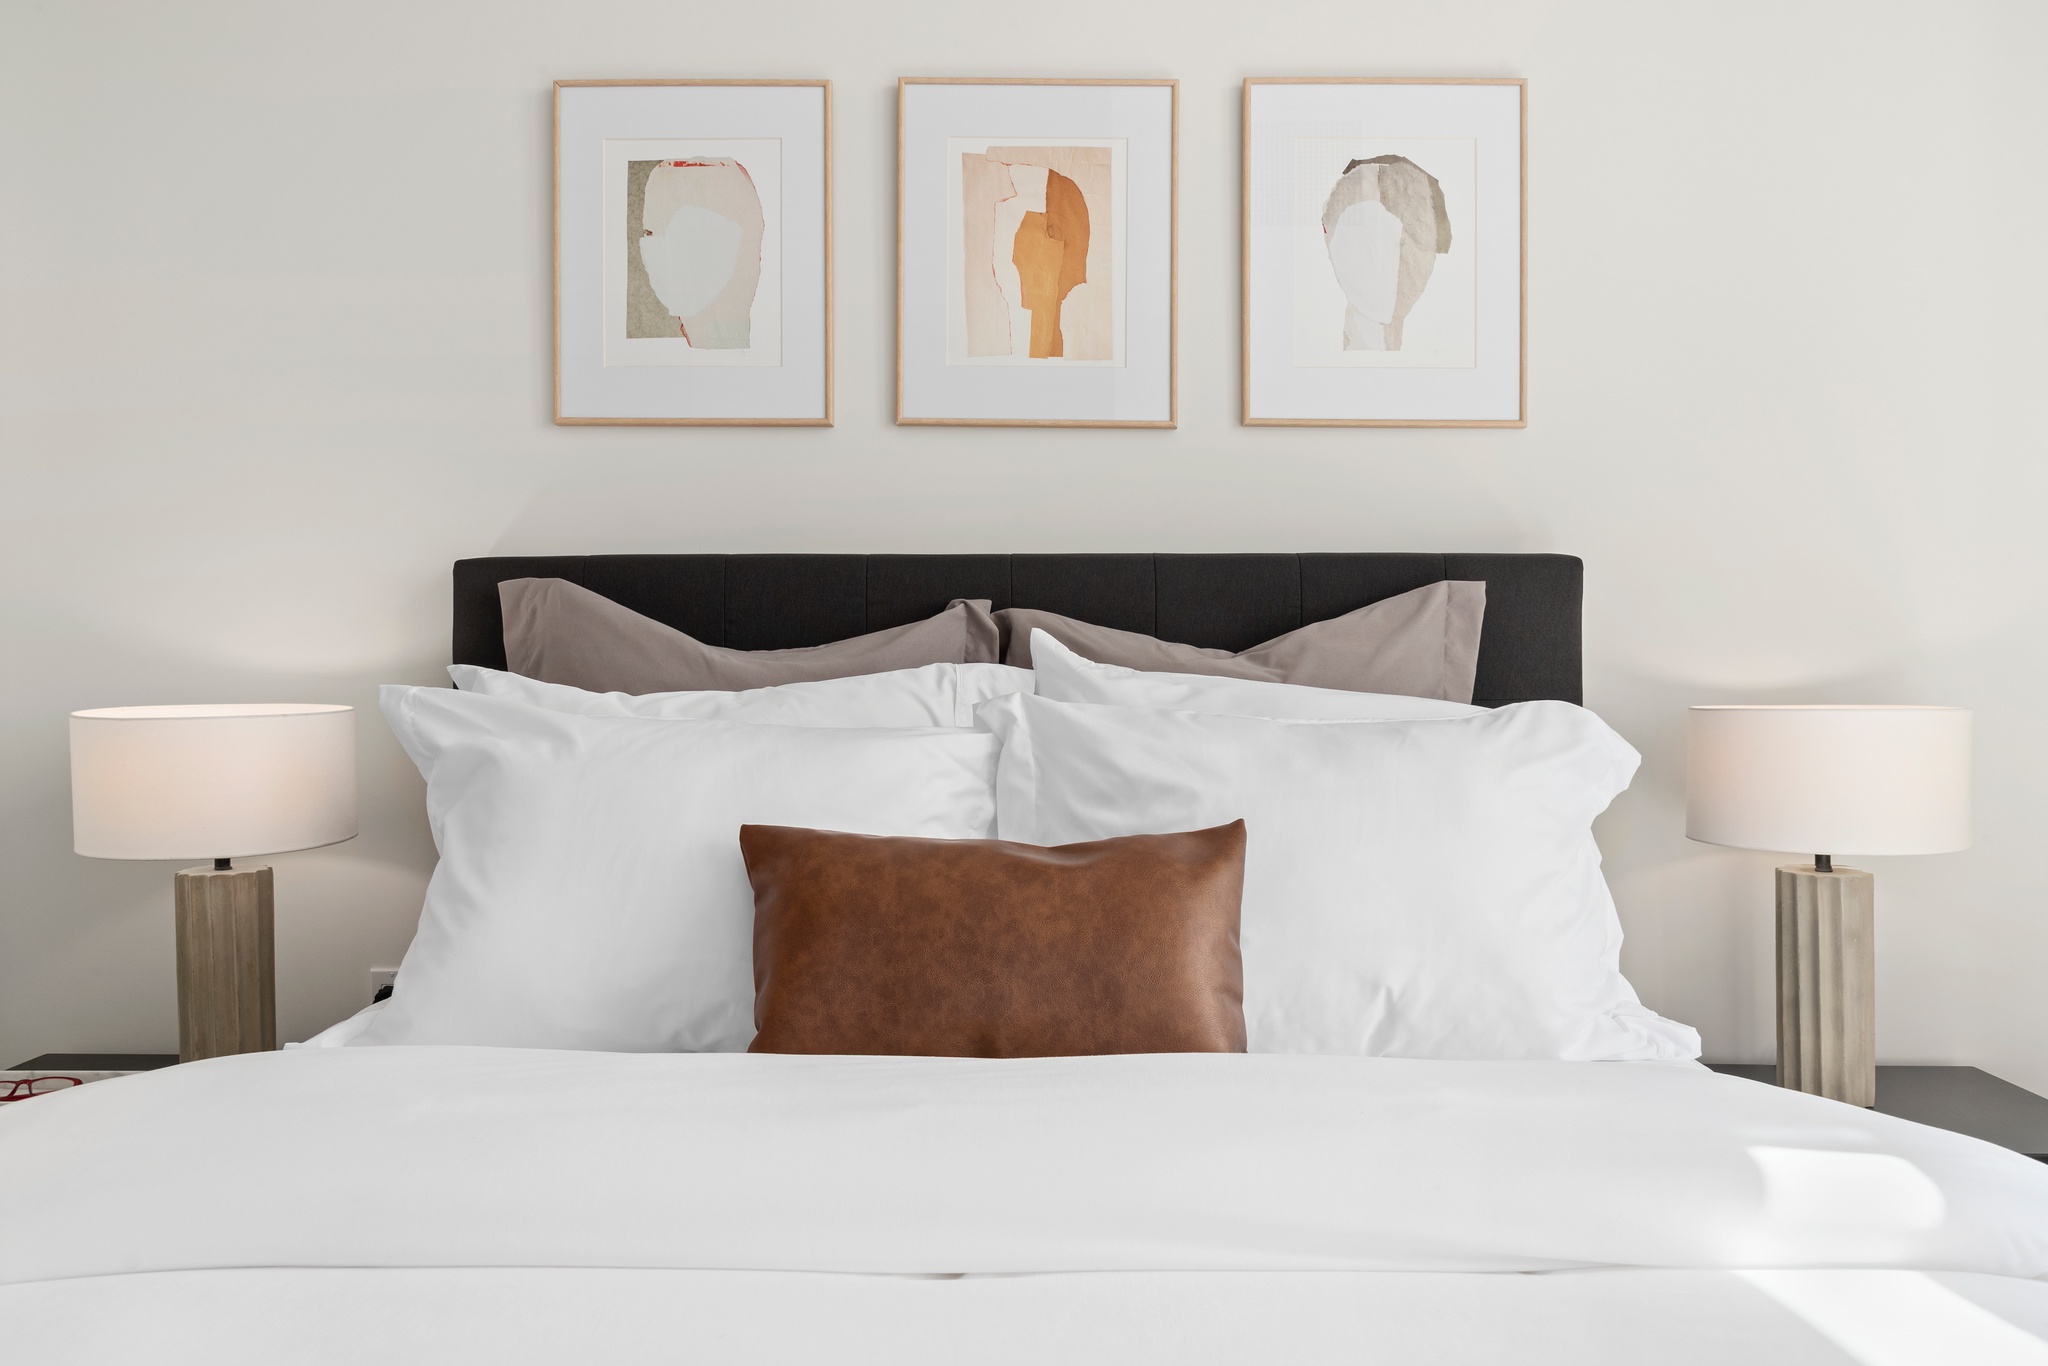 Bright bedroom detail showing white walls, white and brown bedding, dark headboard with tryptic art above, dark headboard and lamps on matching nightstands